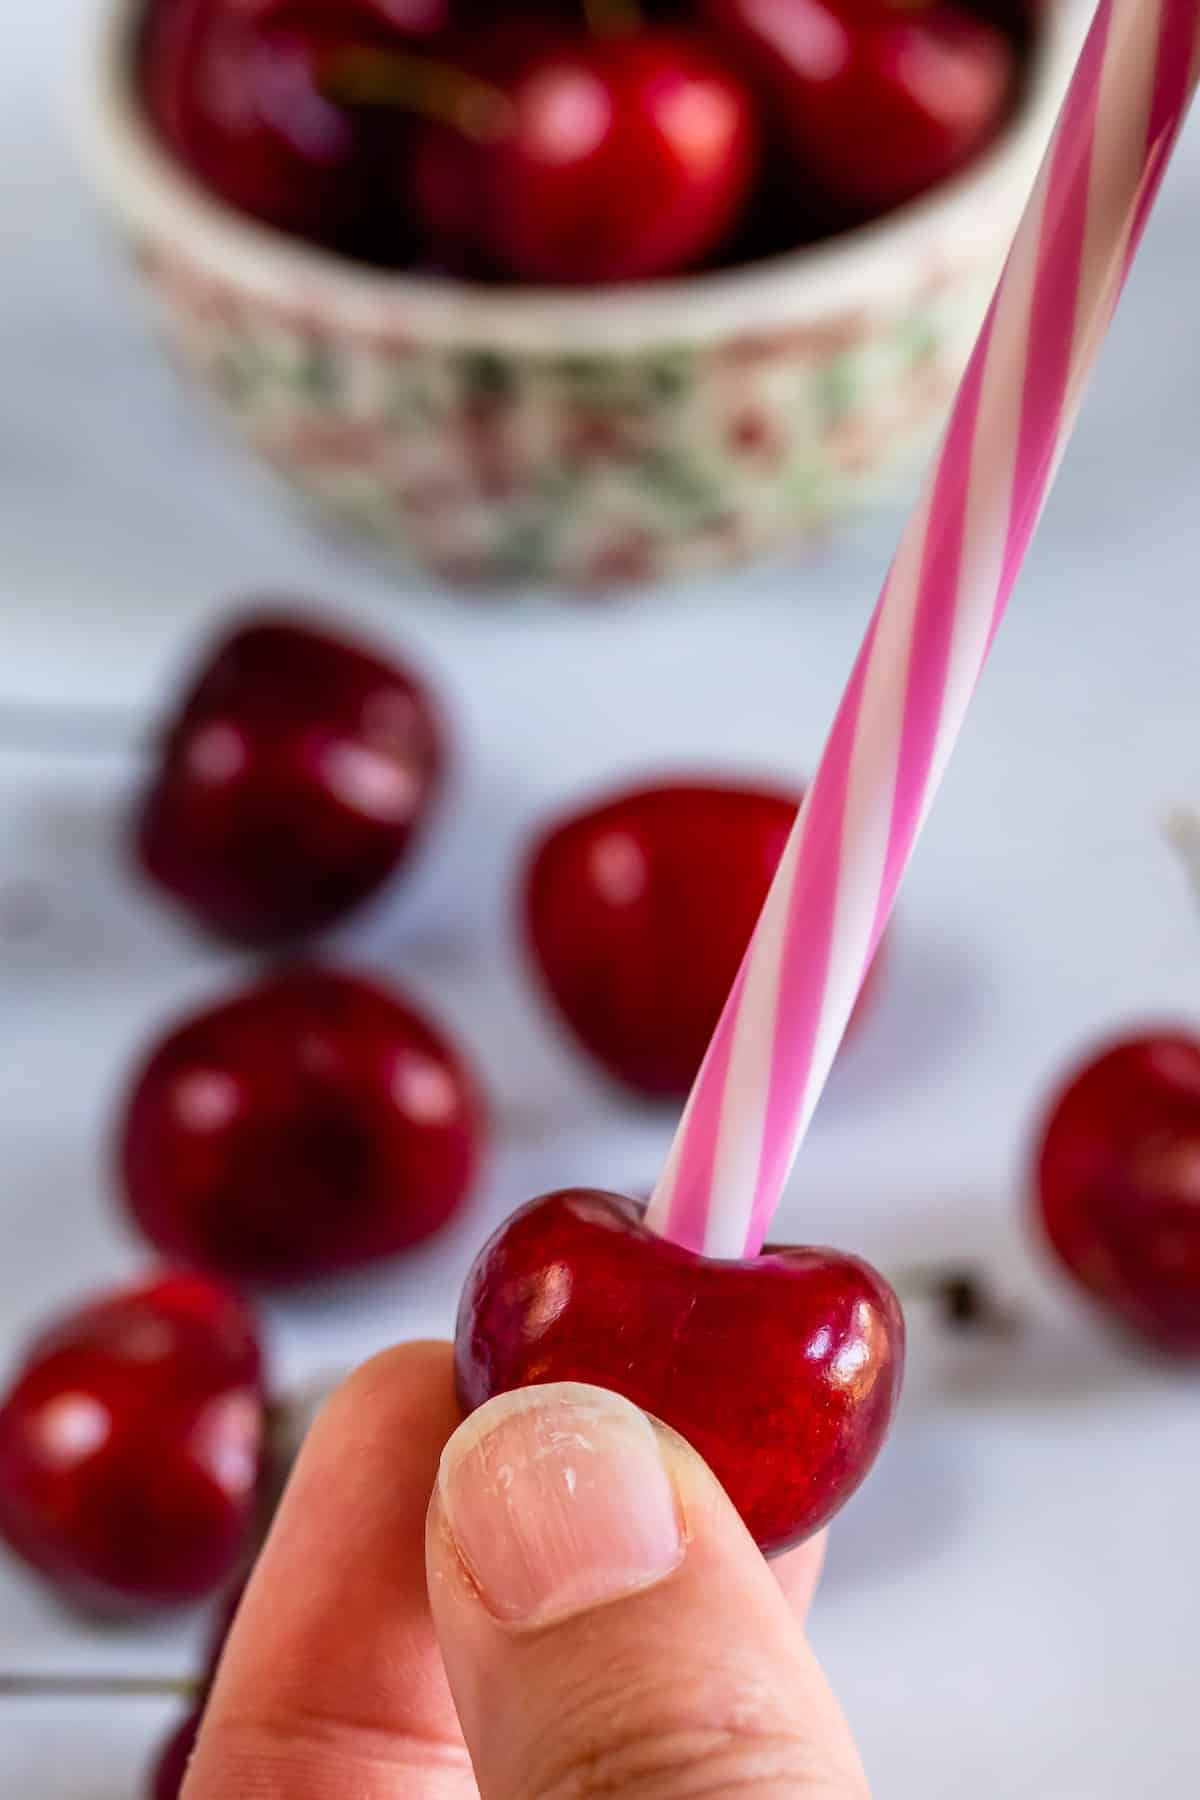 cherry with straw inserted